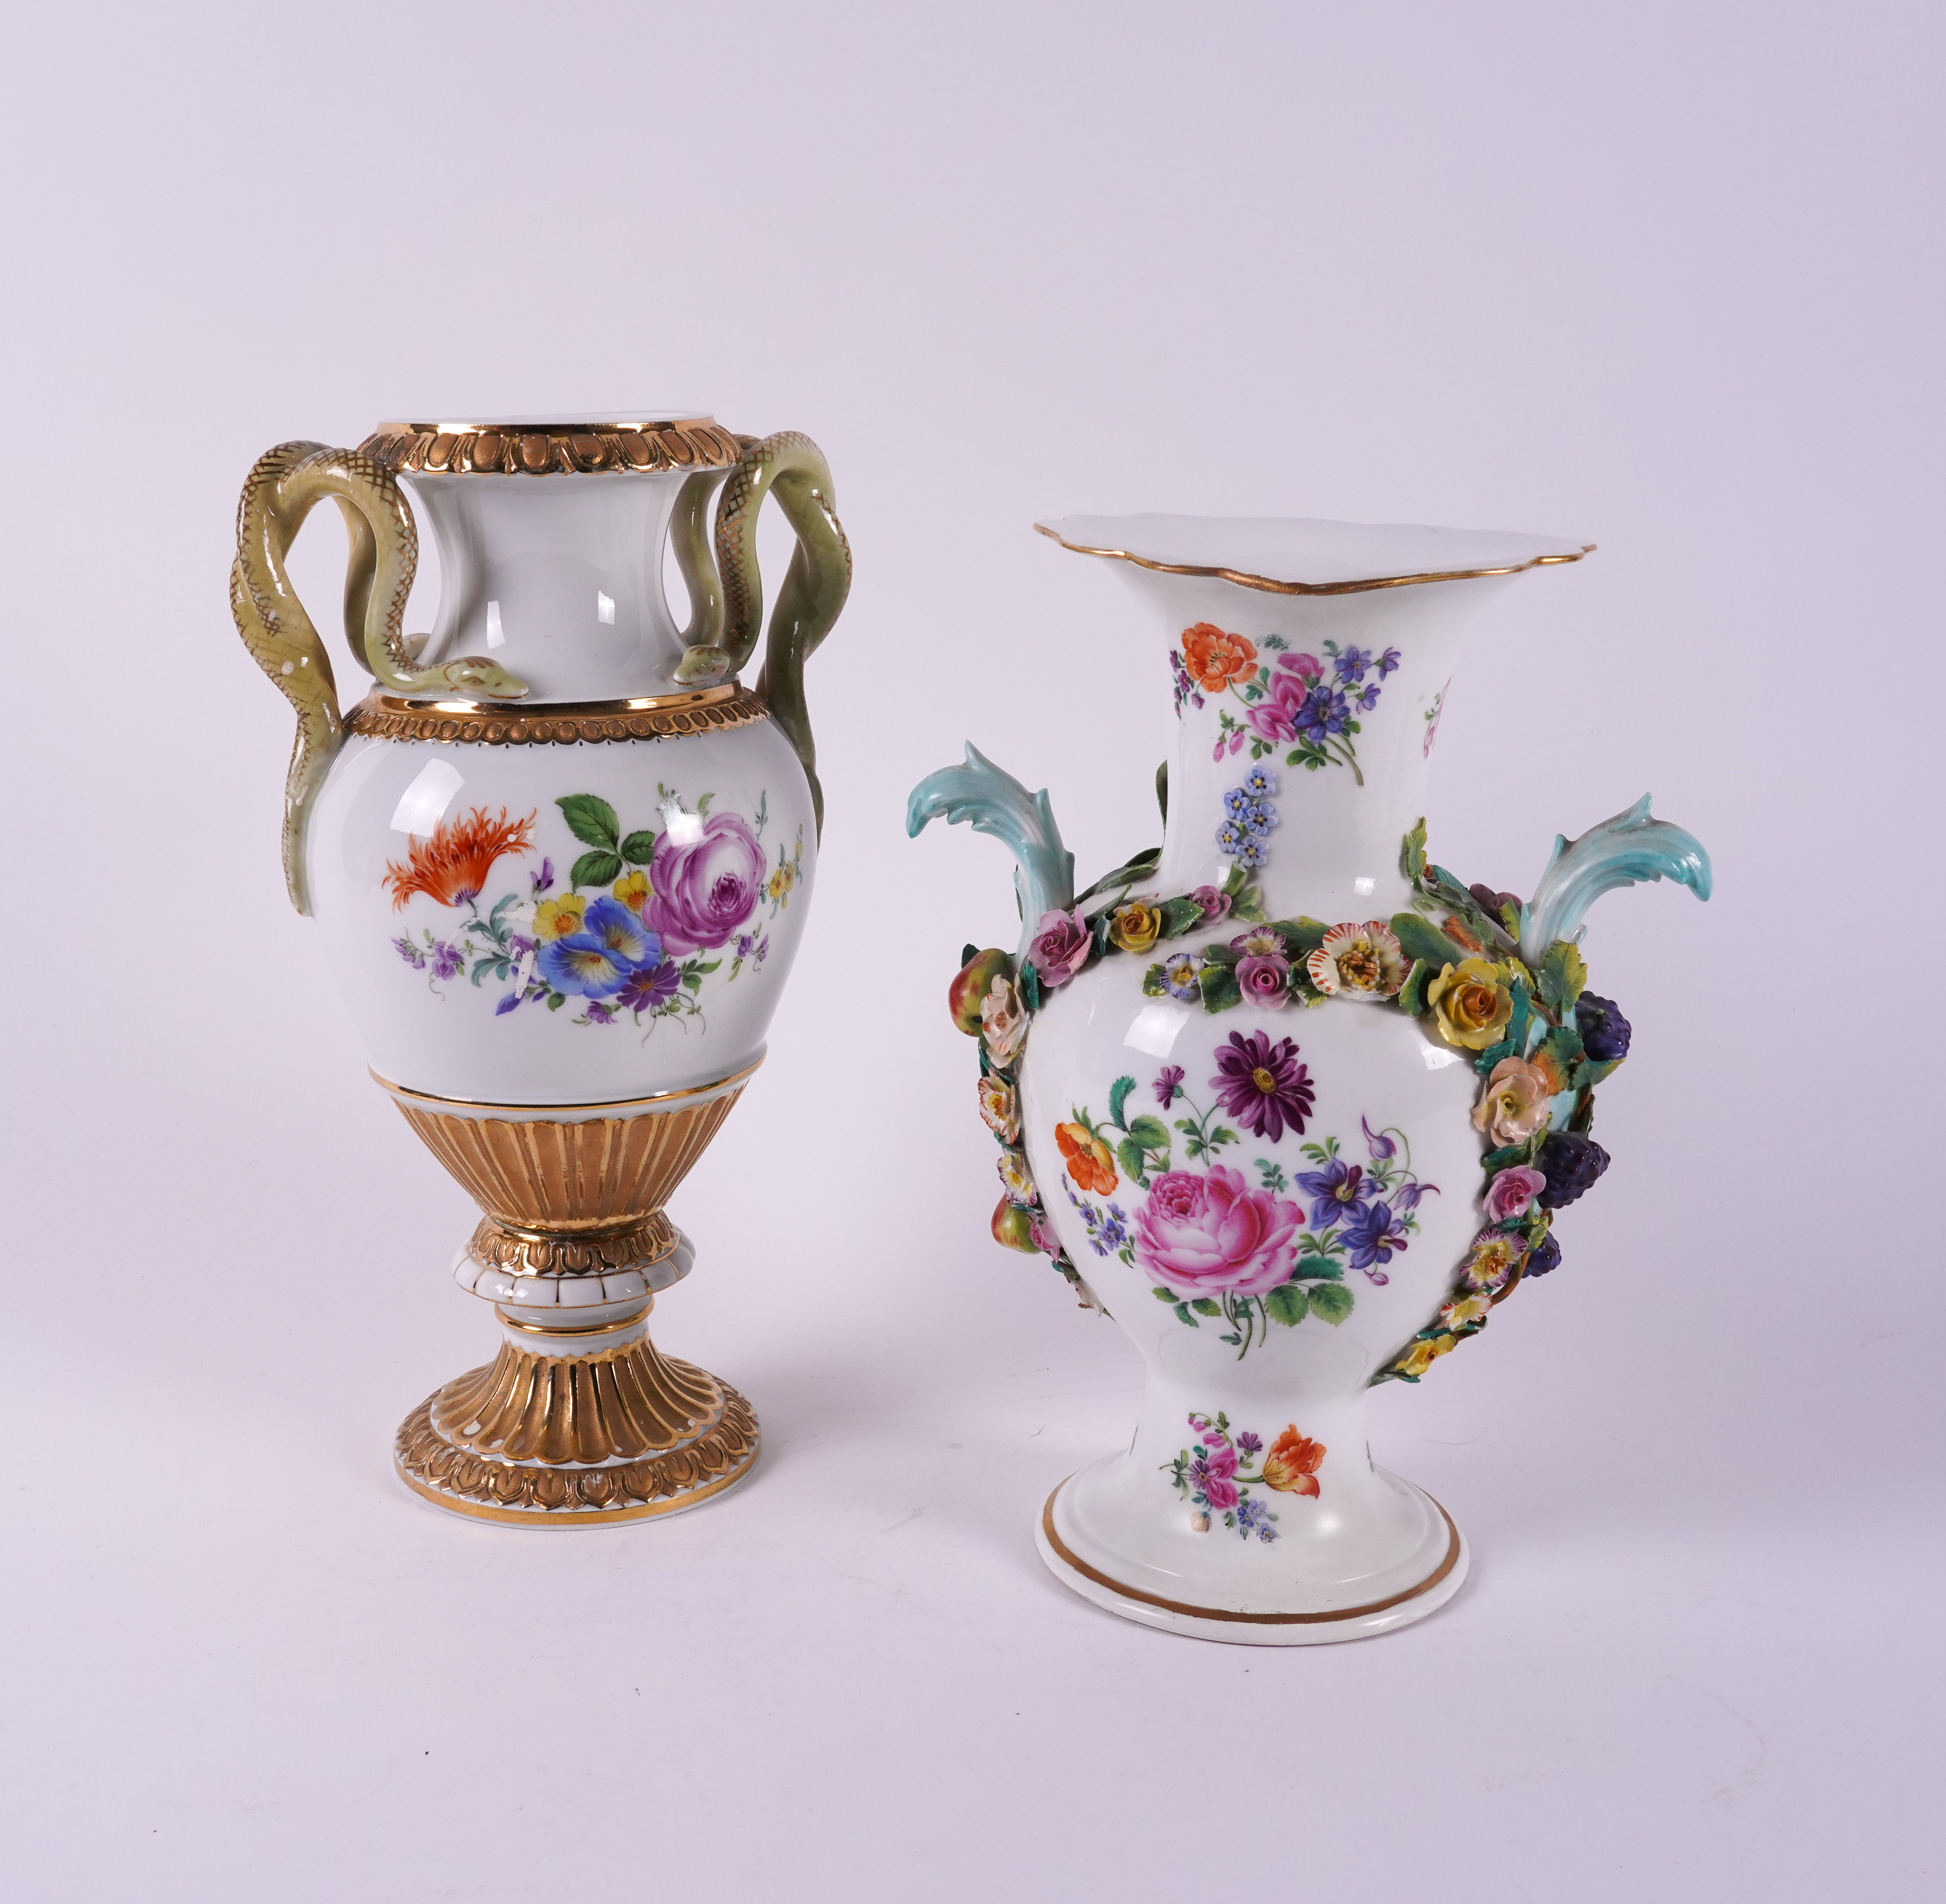 TWO MEISSEN PORCELAIN TWO-HANDLED VASES (2) - Image 5 of 5